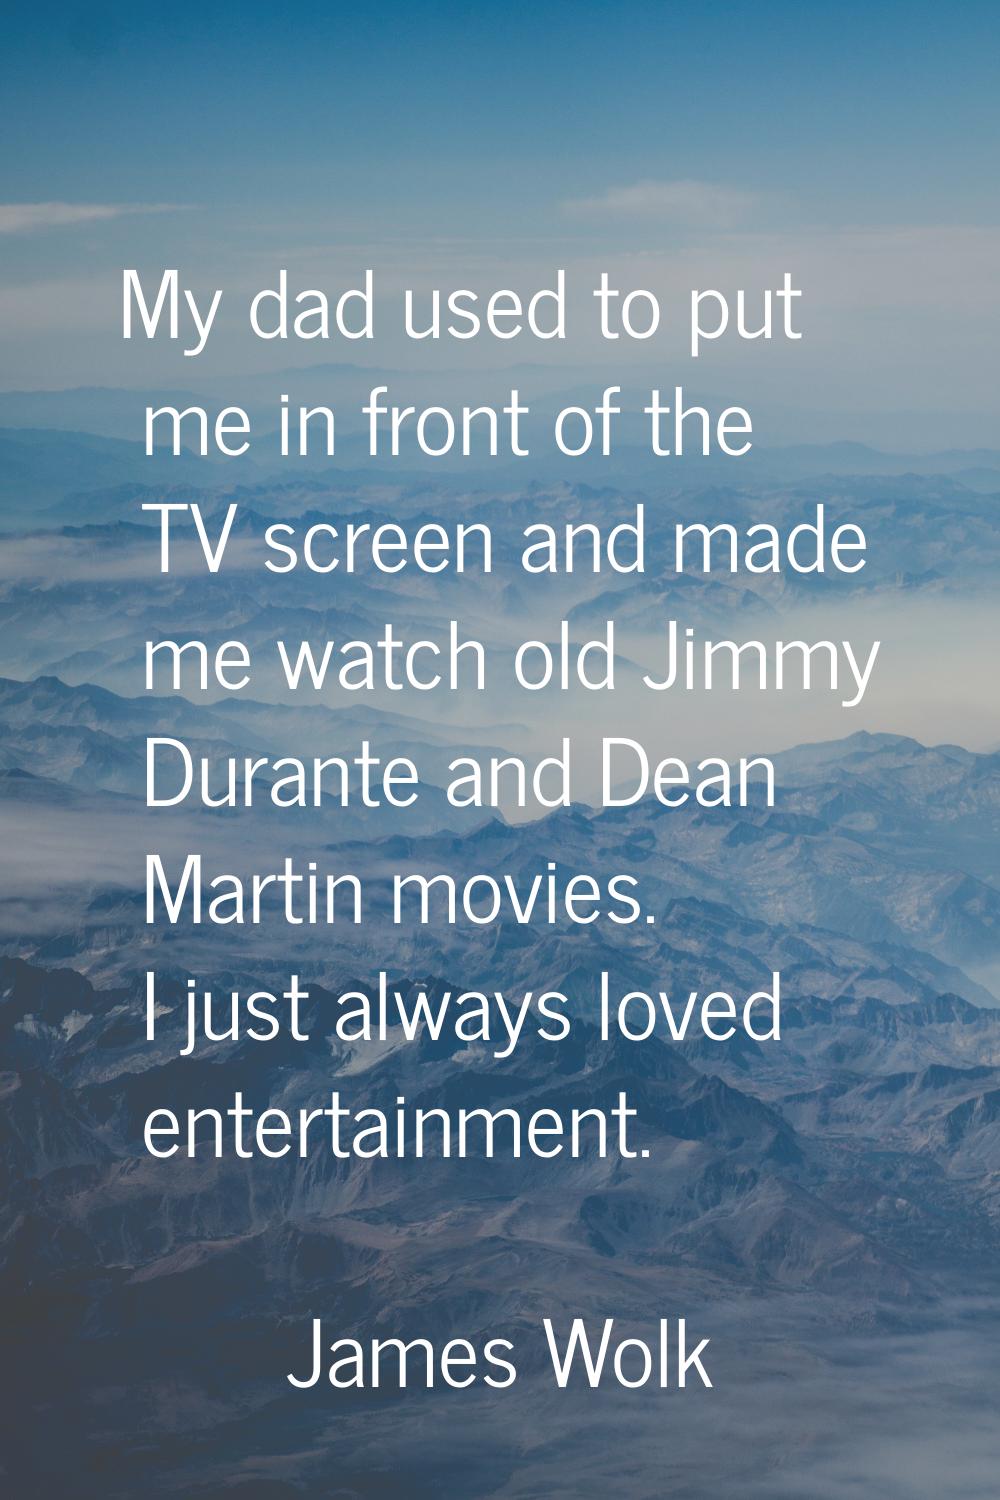 My dad used to put me in front of the TV screen and made me watch old Jimmy Durante and Dean Martin